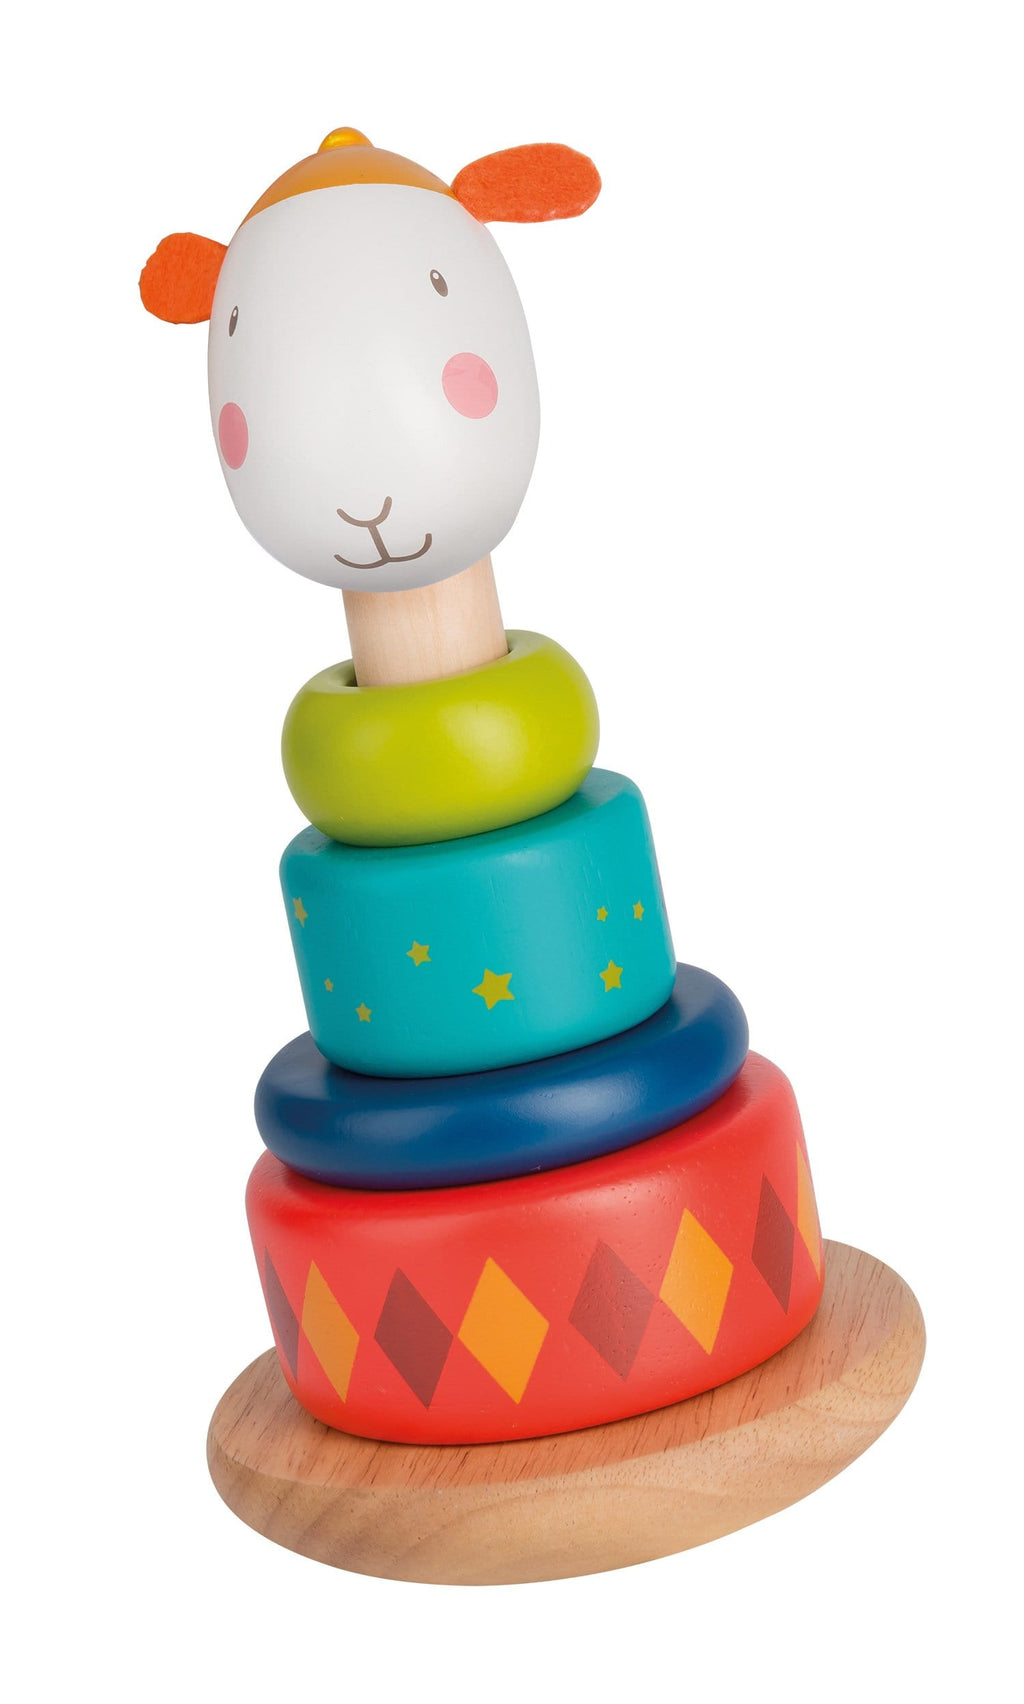 This stackable wobbly sheep Zephyr in lacquered wood with felt ears is a fun way to learn shapes and colours and develop motor skills. 